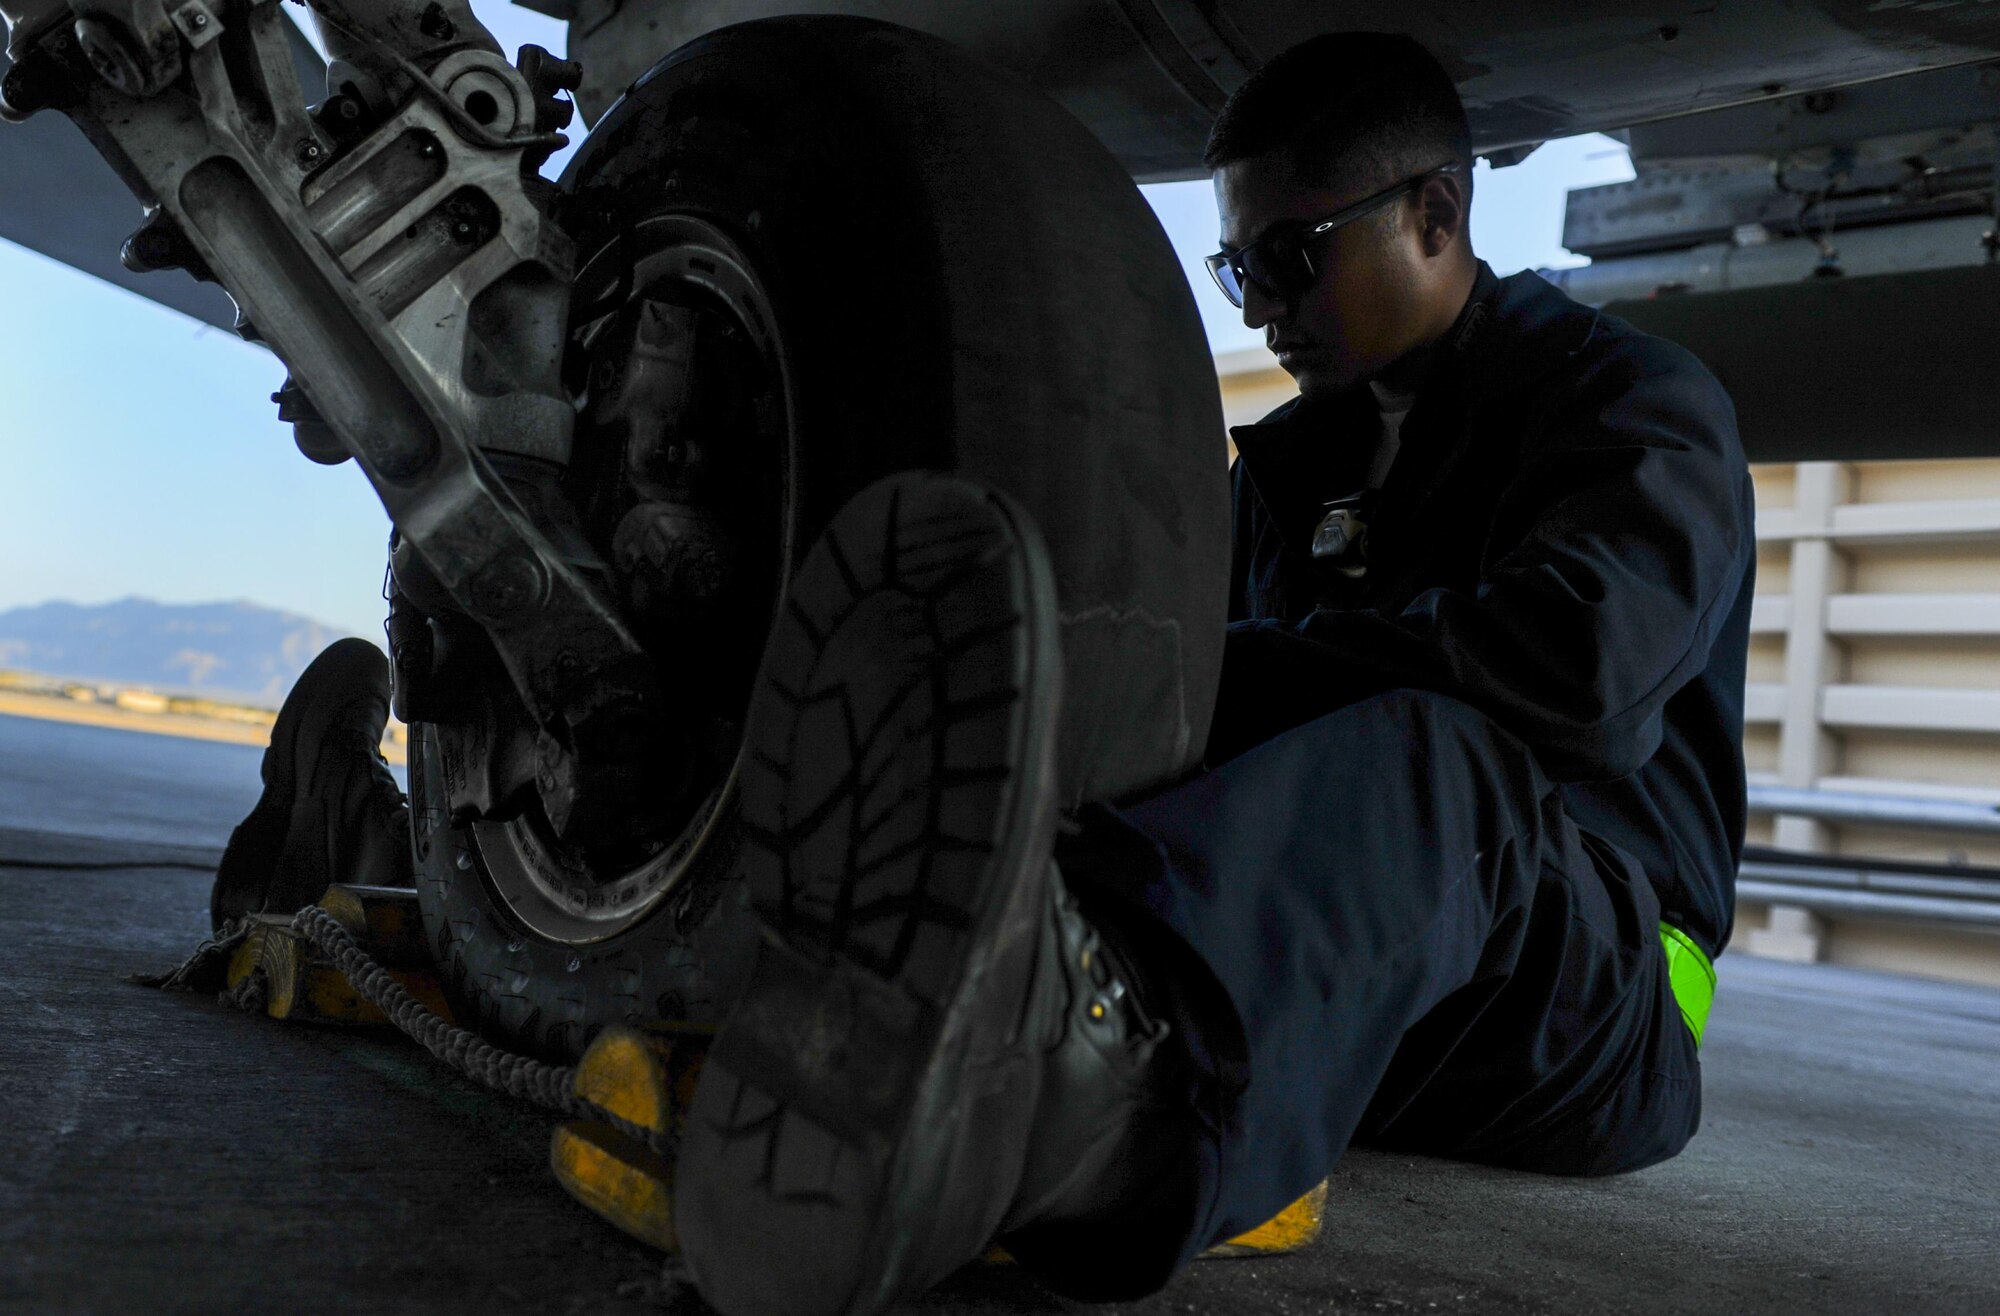 Senior Airman Manuel Jimenez, 555th Fighter Squadron Crew Chief, Aviano Air Force Base, Italy, cleans the landing gear of an F-16 Fighting Falcon at Nellis Air Force Base, Nev., Aug. 2, 2016, before participating in Green Flag 16-8. During exercise execution, Green Flag staff member’s direct, monitor, and instruct visiting units in the conduct of air operations in support of ground forces. (United States Air Force photo by Airman 1st Class Kevin Tanenbaum/Released)